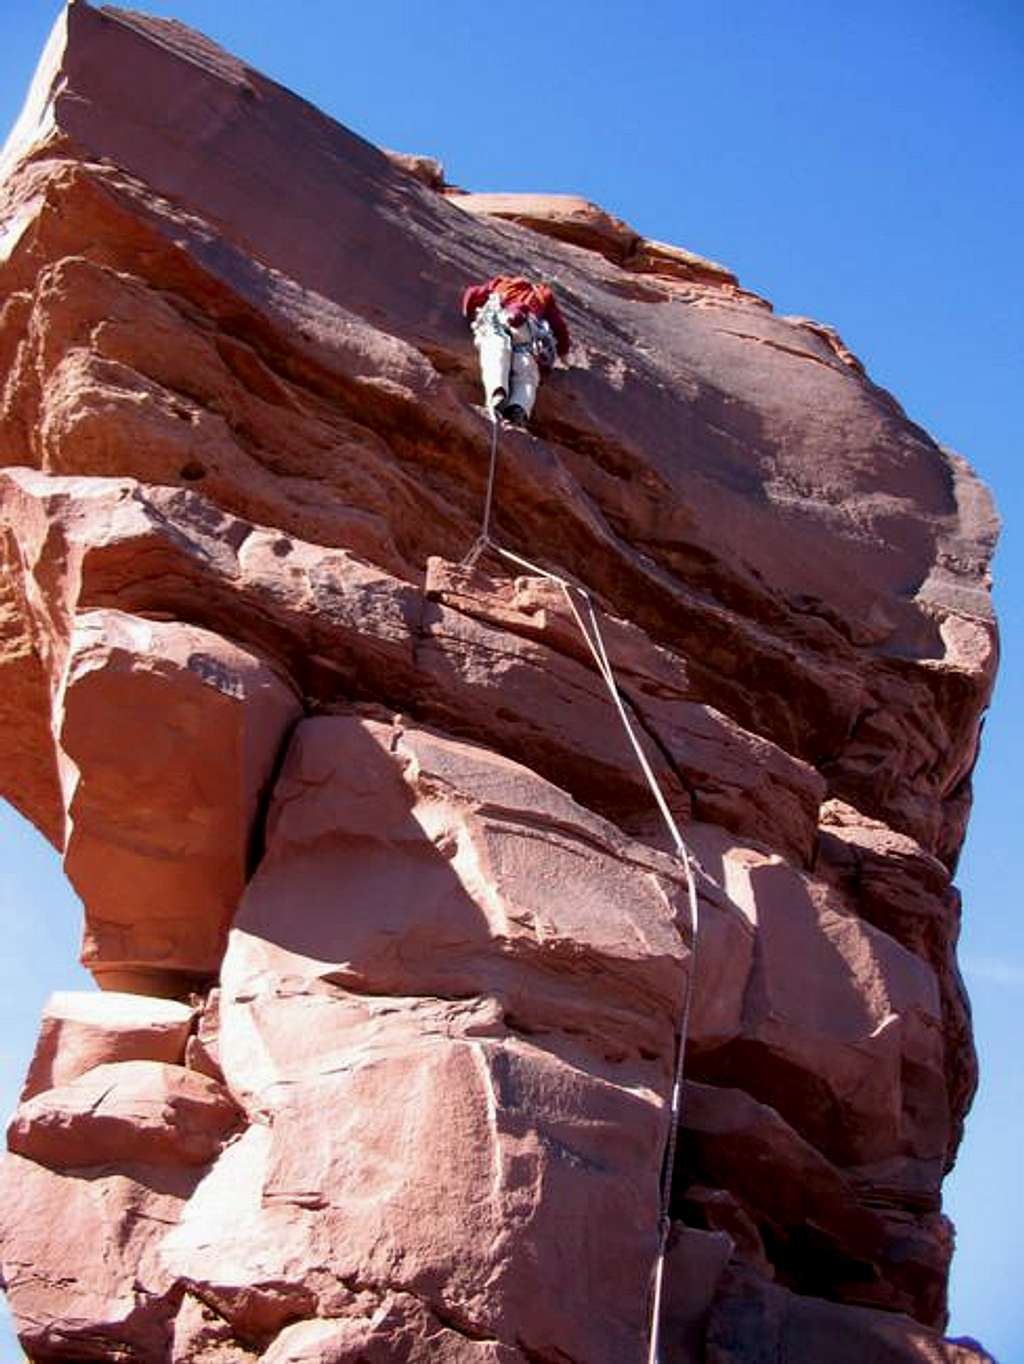 Leading the last pitch (P5)...